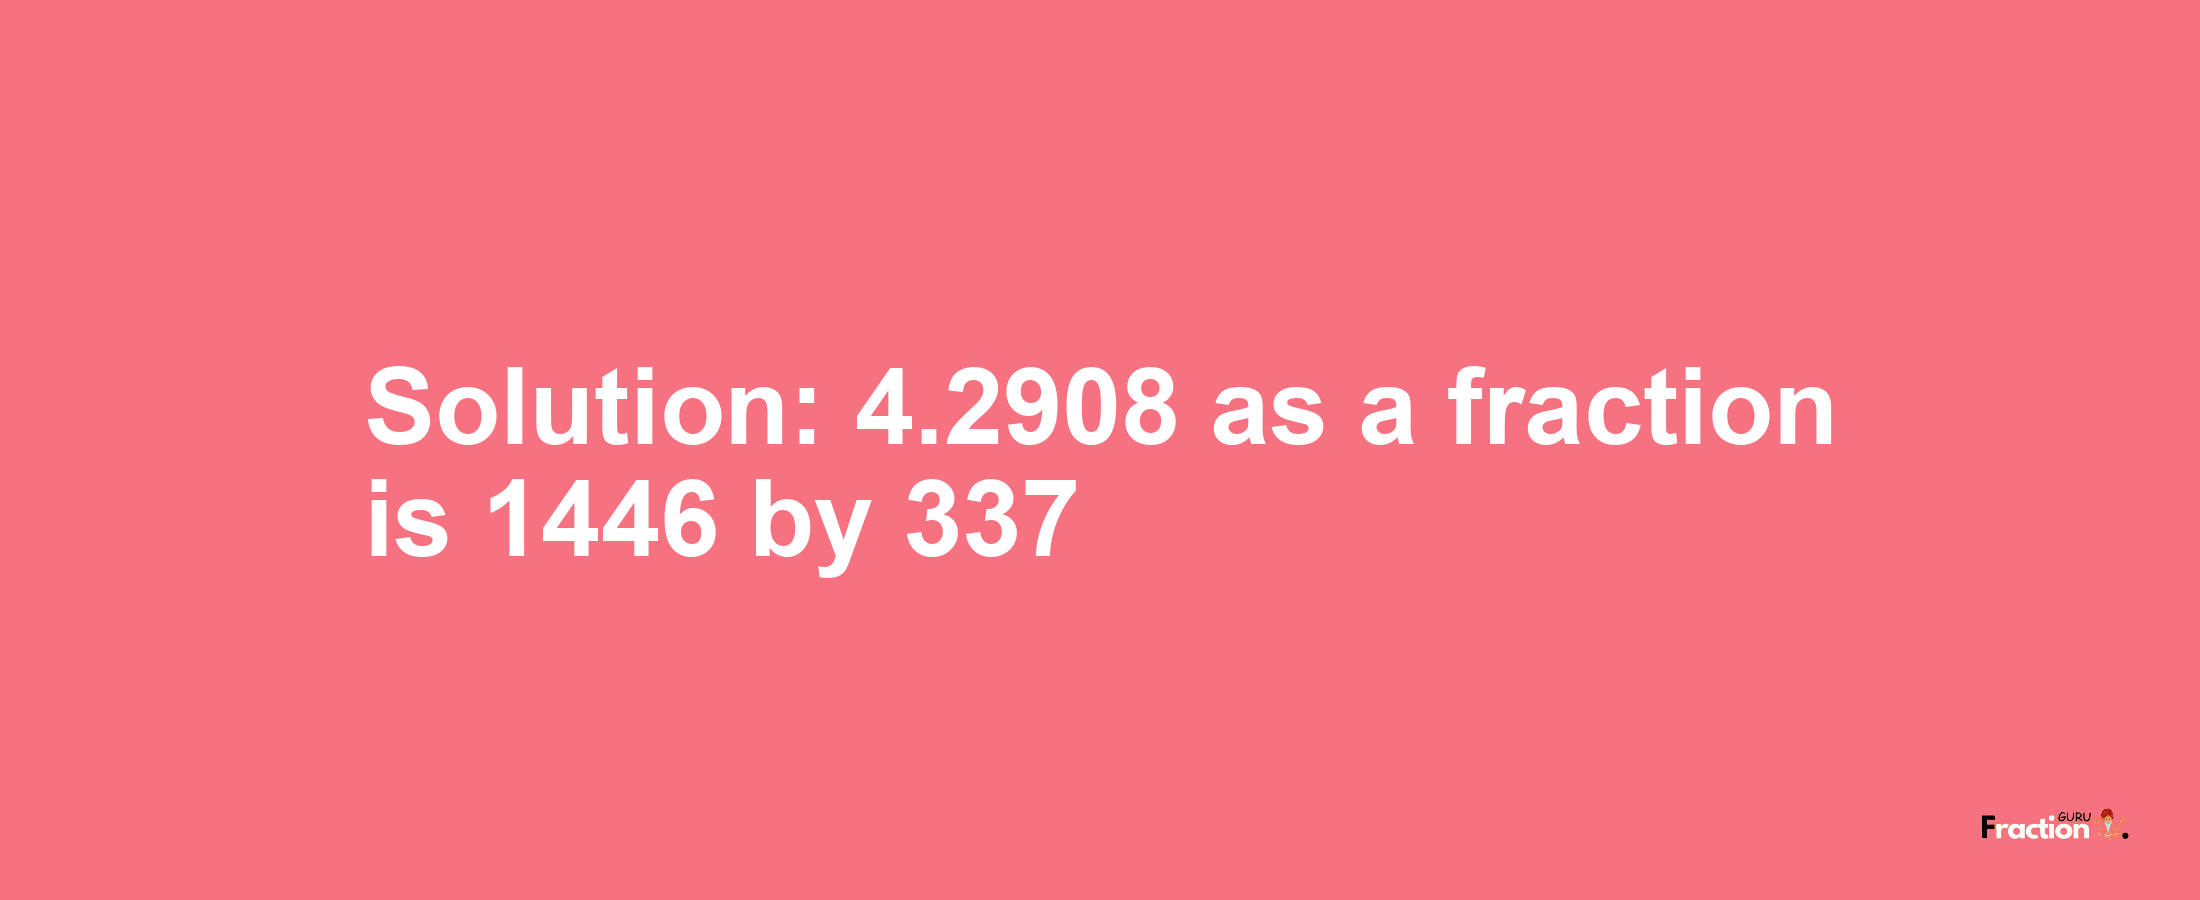 Solution:4.2908 as a fraction is 1446/337